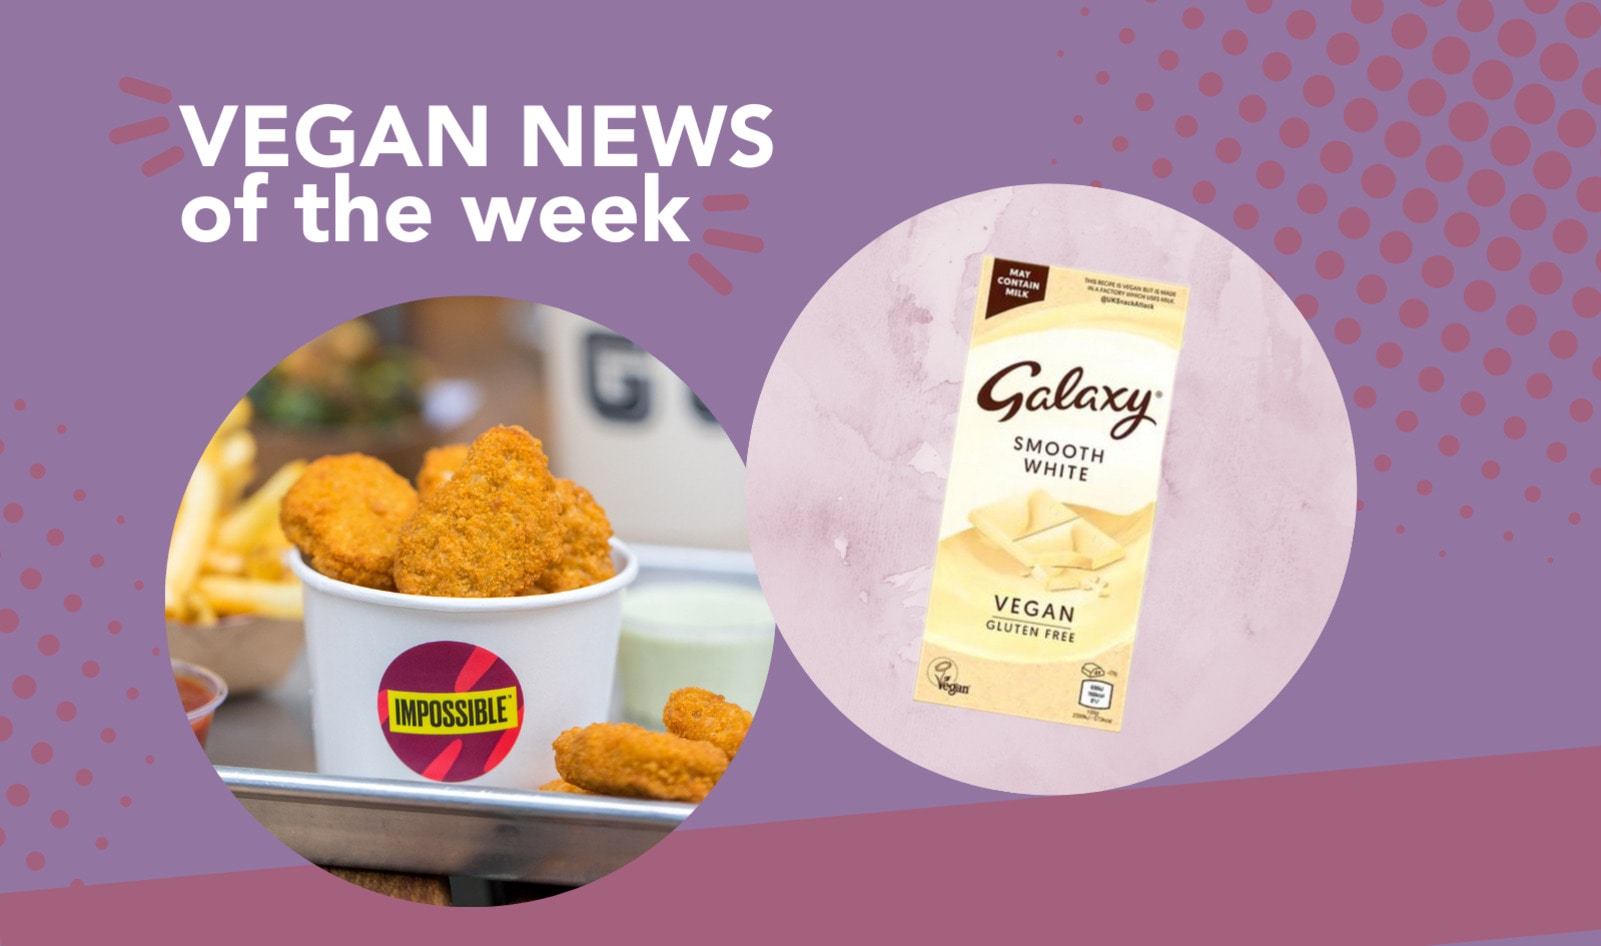 Meatless Chicken Buckets, New White Chocolate, and More Vegan Food News of the Week